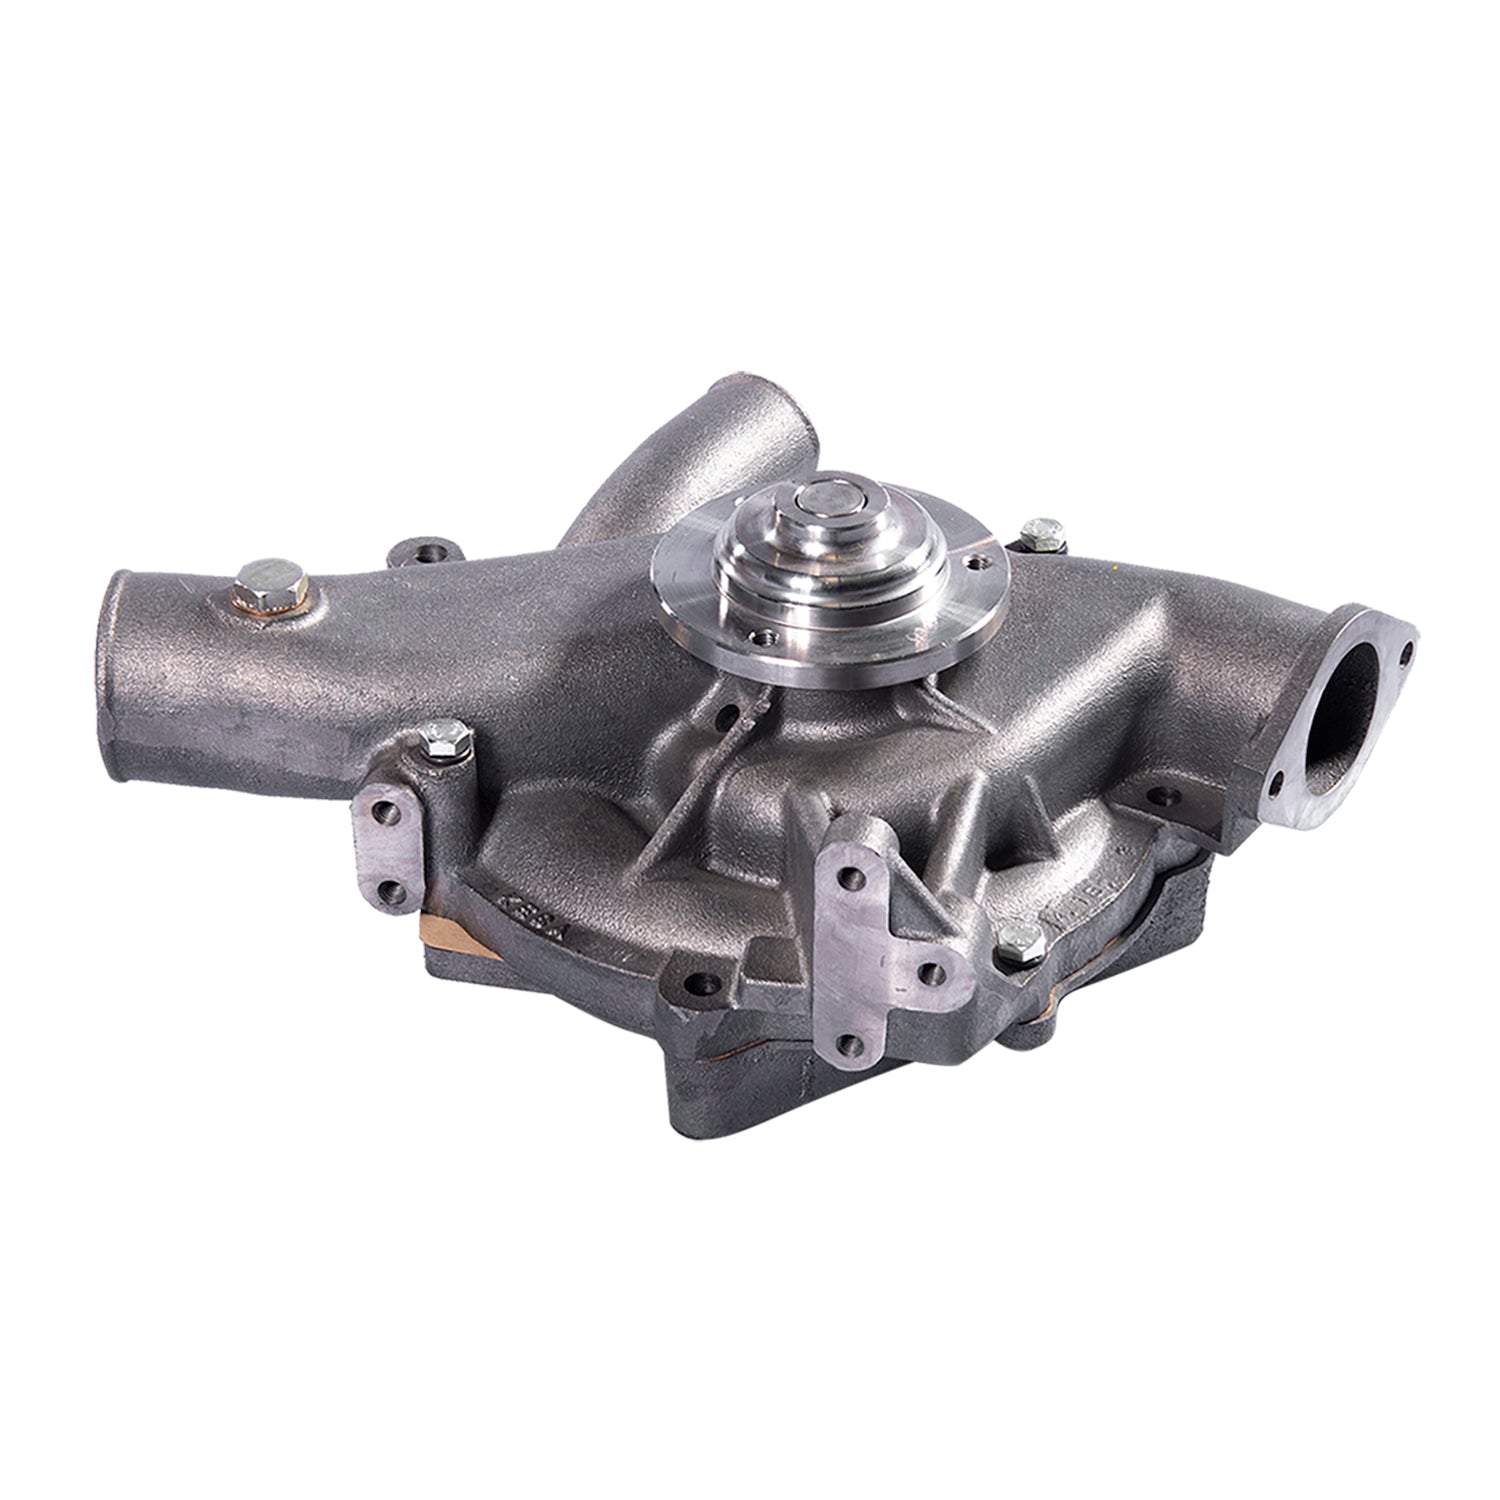 Water Pump Replacement for Iveco; TURBOSTAR 190-42 LAVERDA 3900  4764156